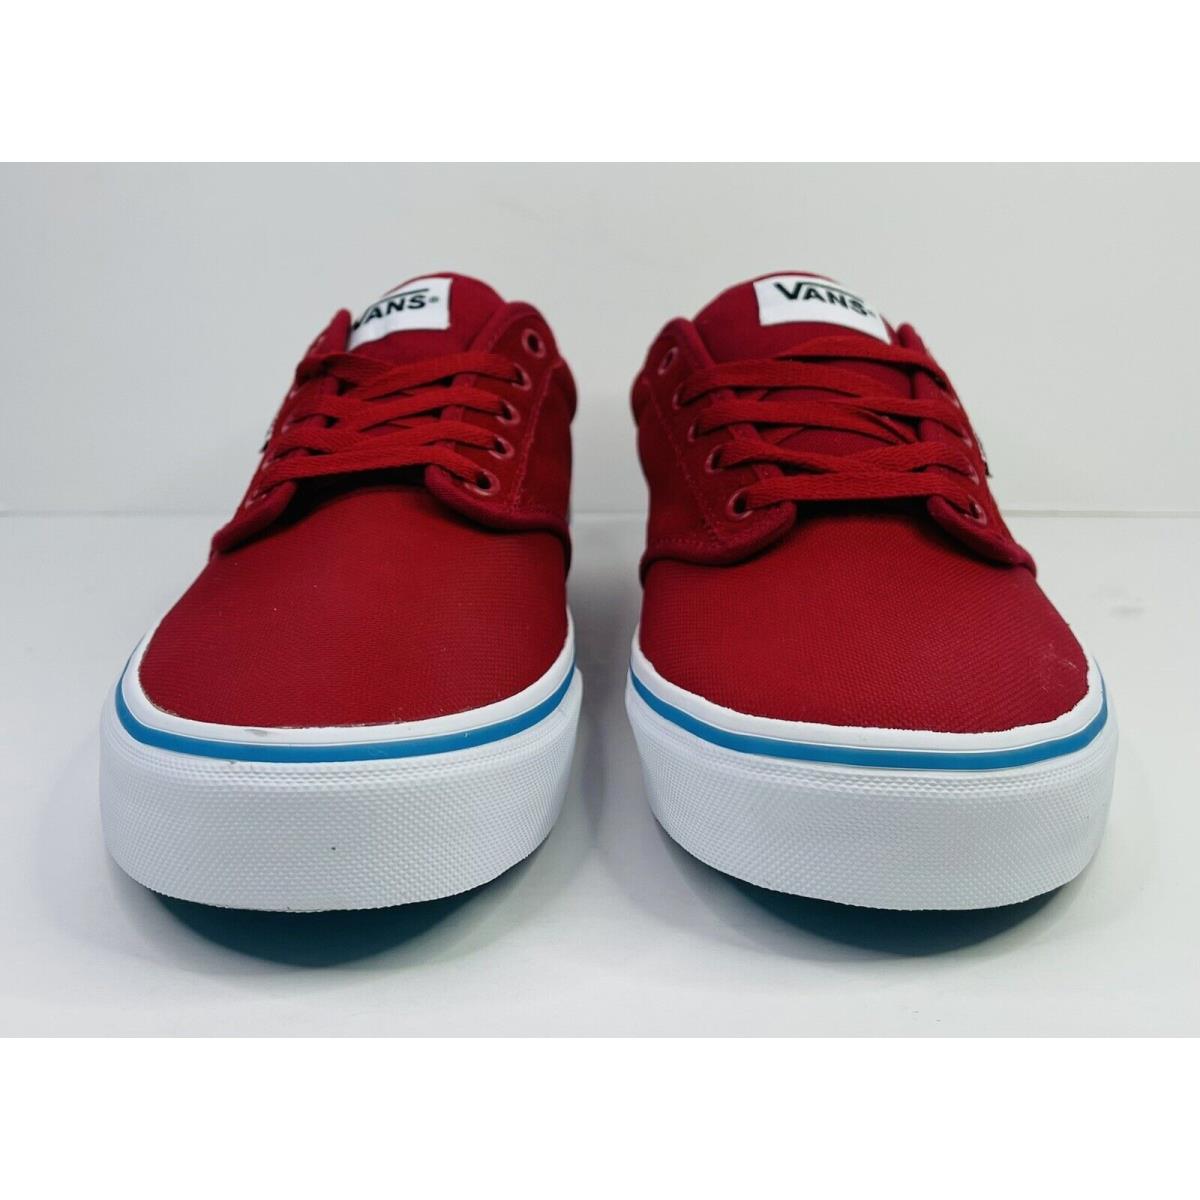 Vans Atwood Tectuff Chili Pepper Red Size 12